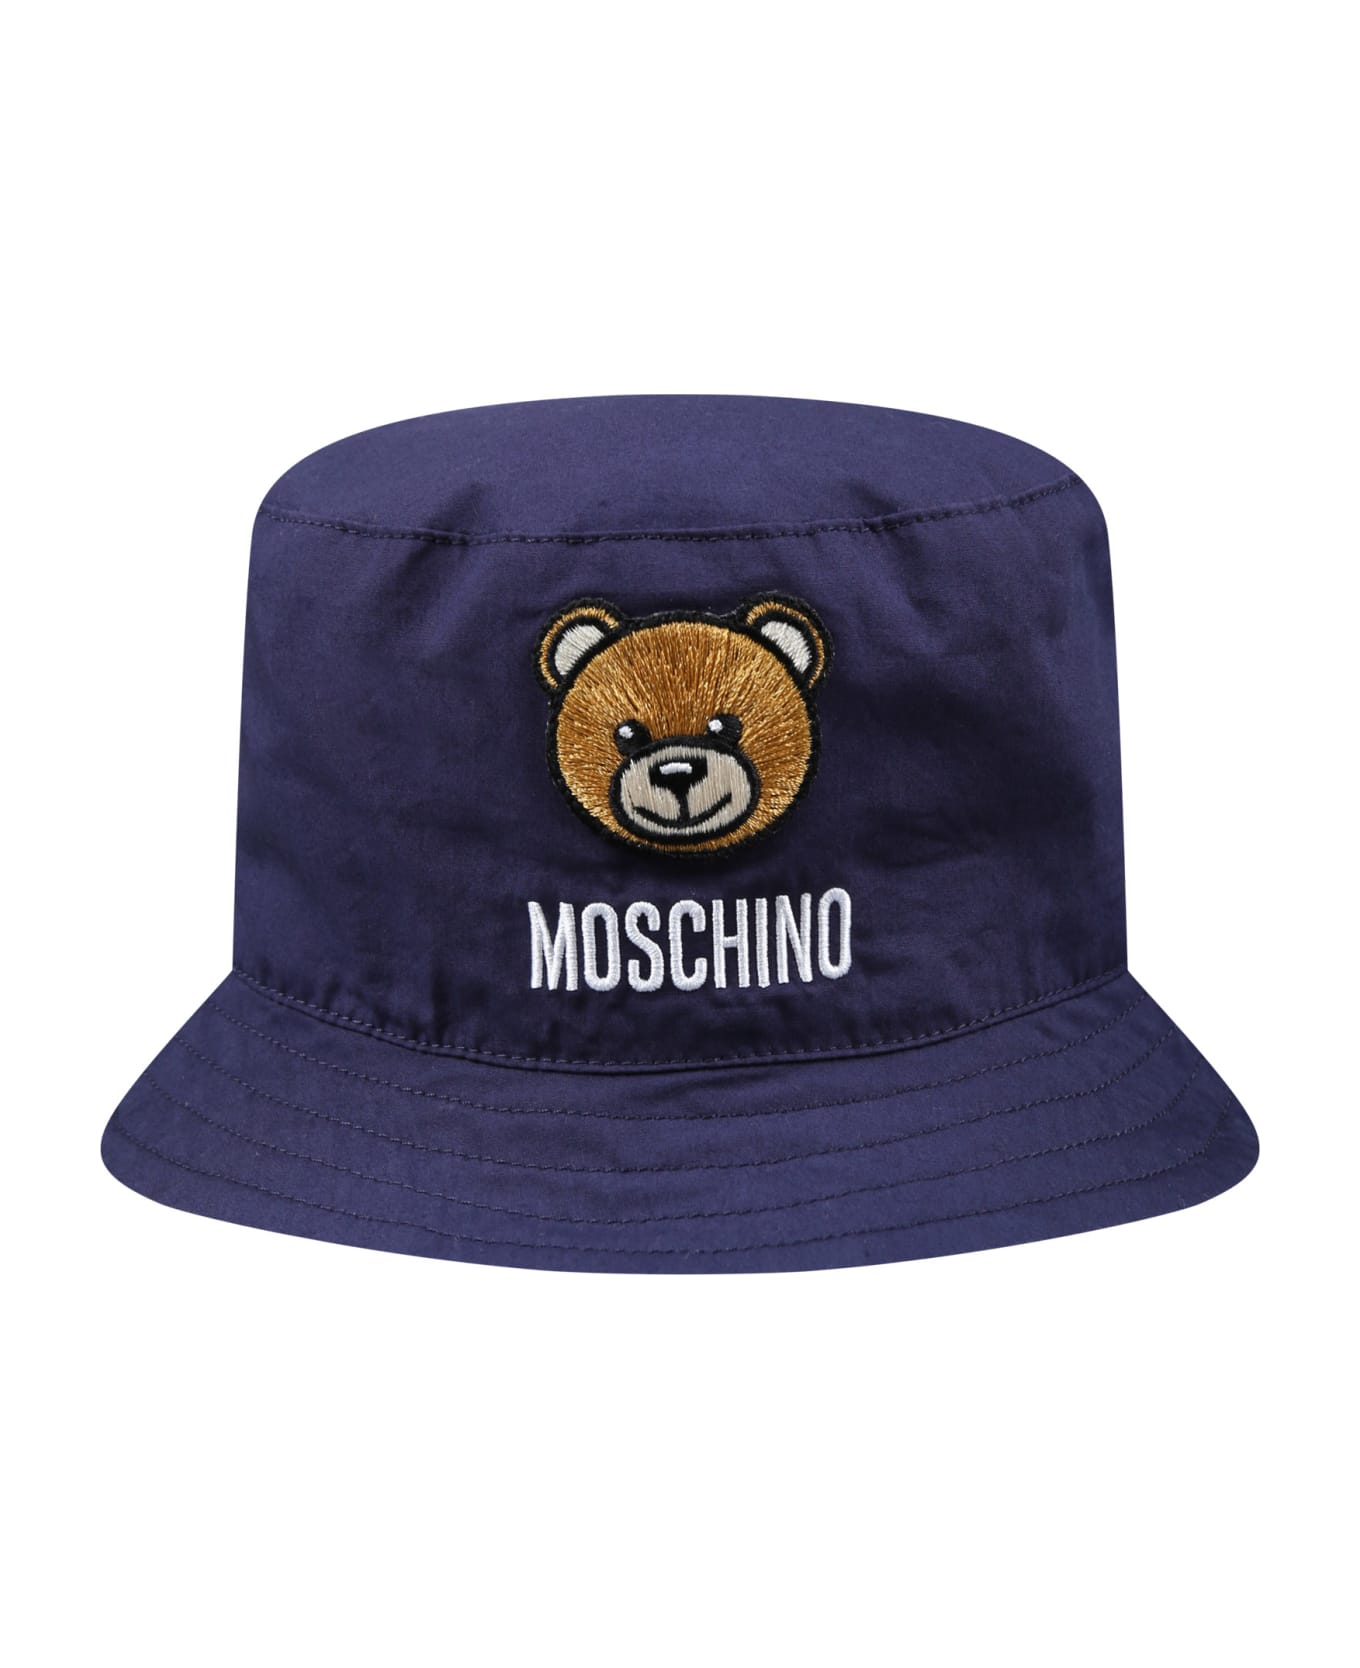 Moschino Blue Cloche For Baby Kids With Teddy Bear - Blue アクセサリー＆ギフト